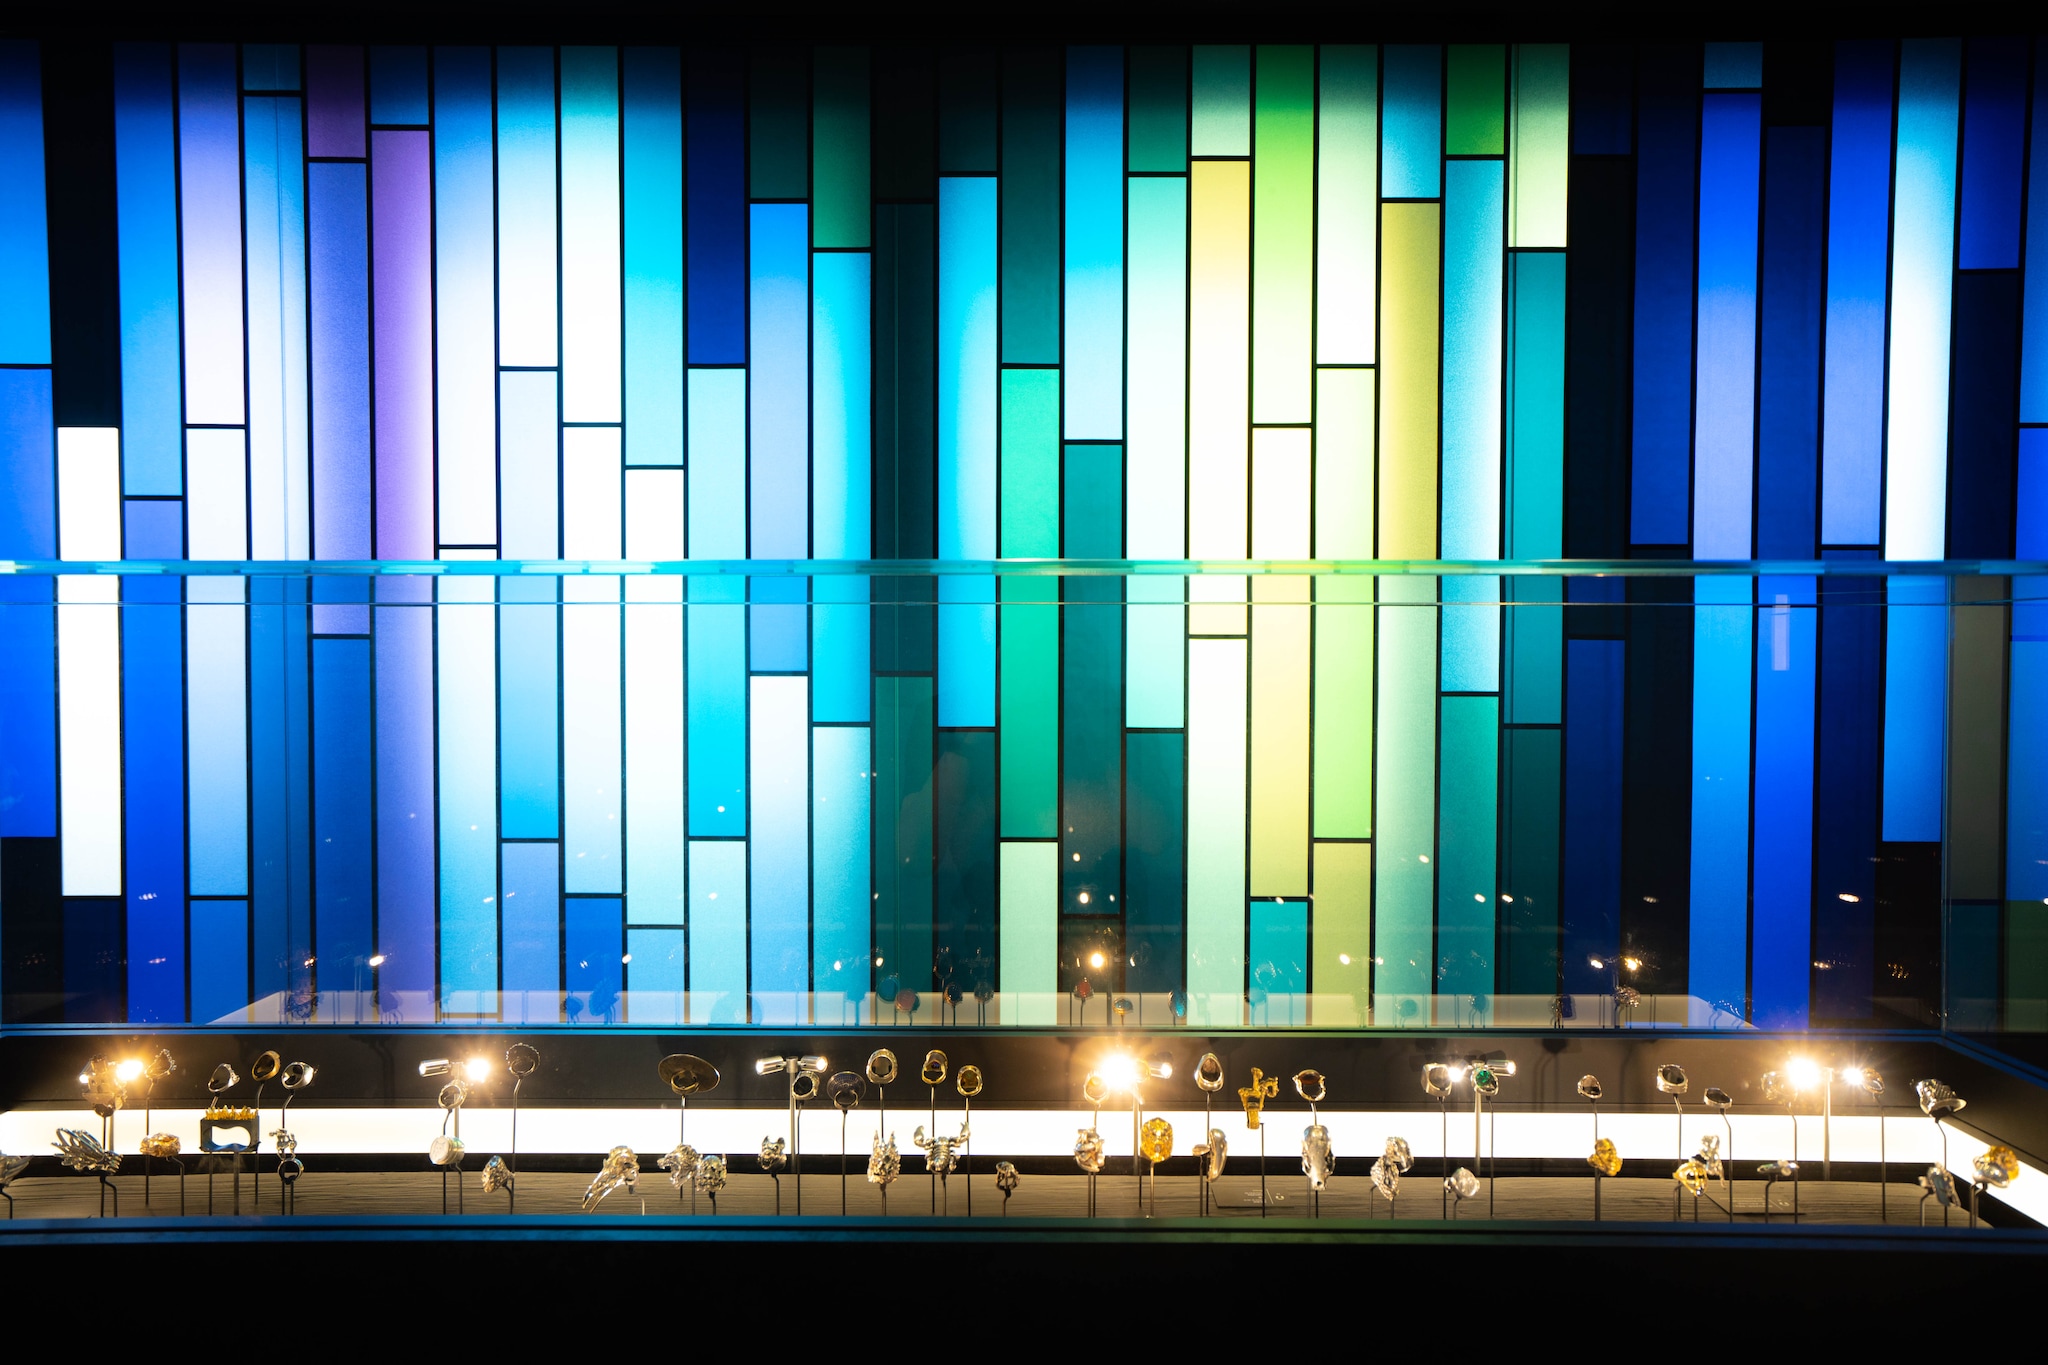 10. Scenography with stained glass